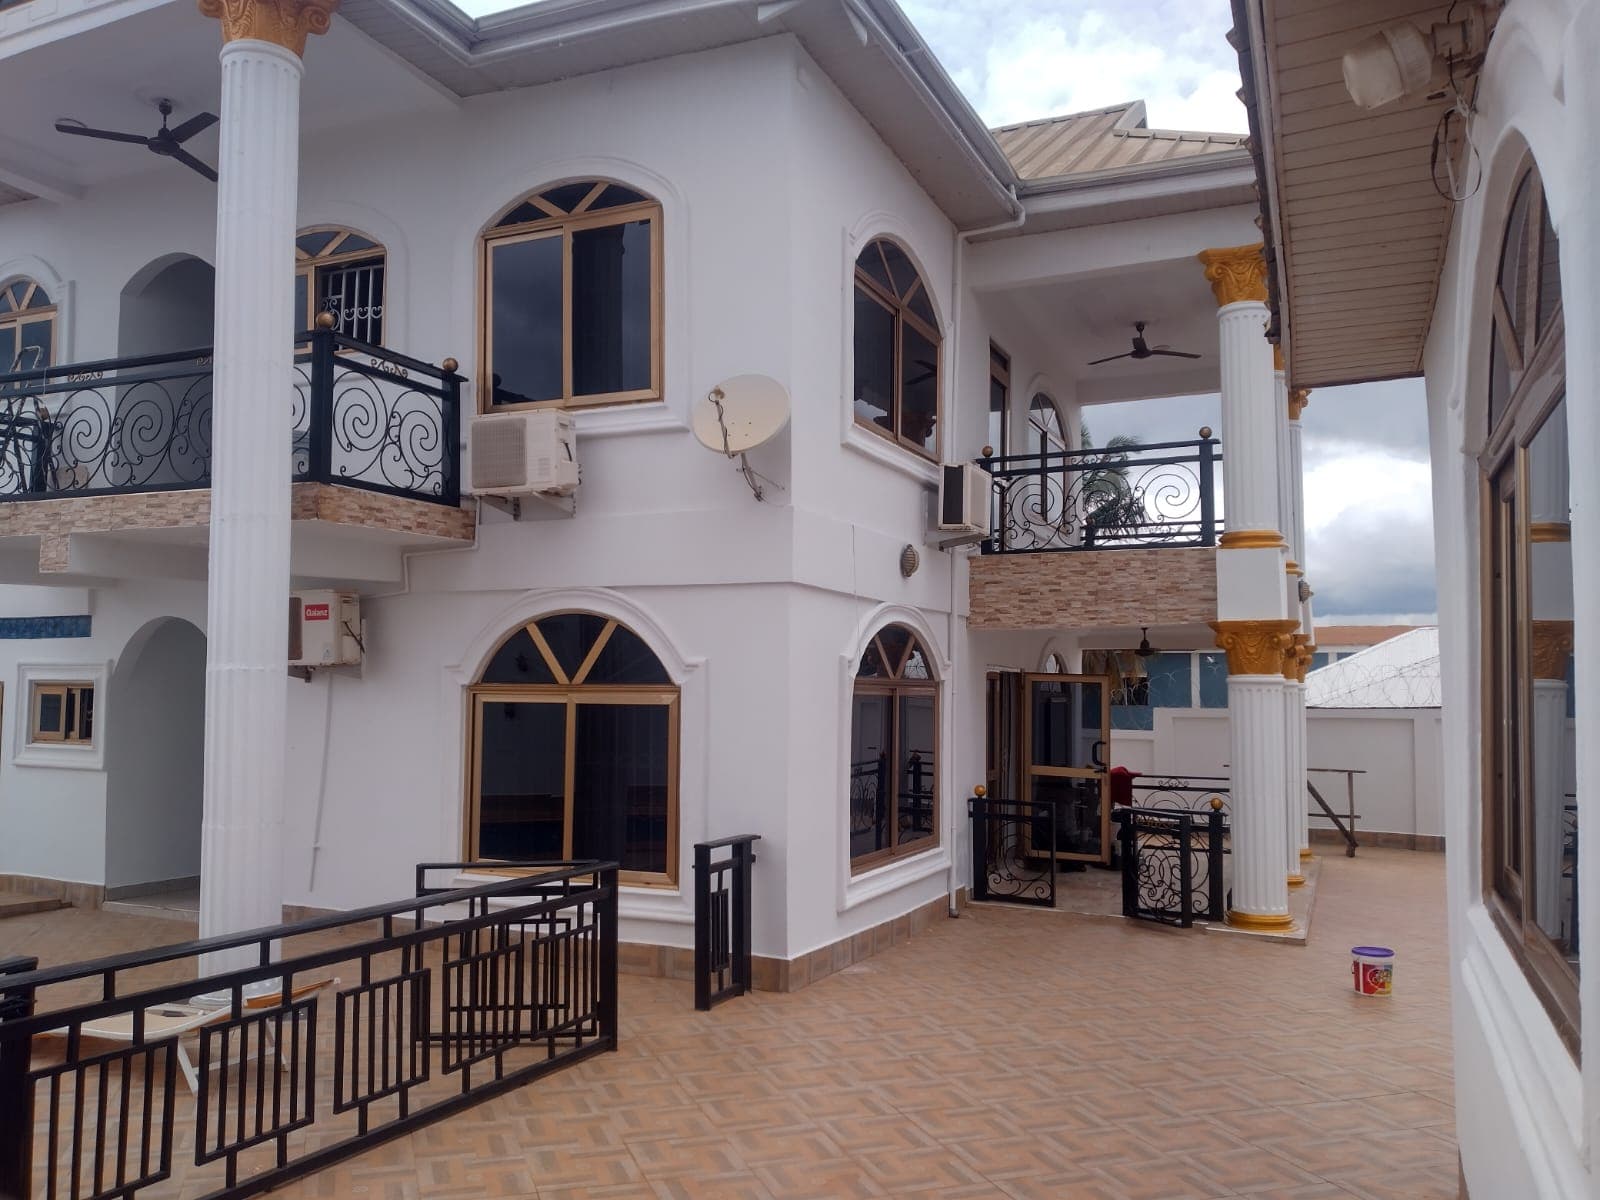 6 bedroom house with swimming pool at santasi for sale